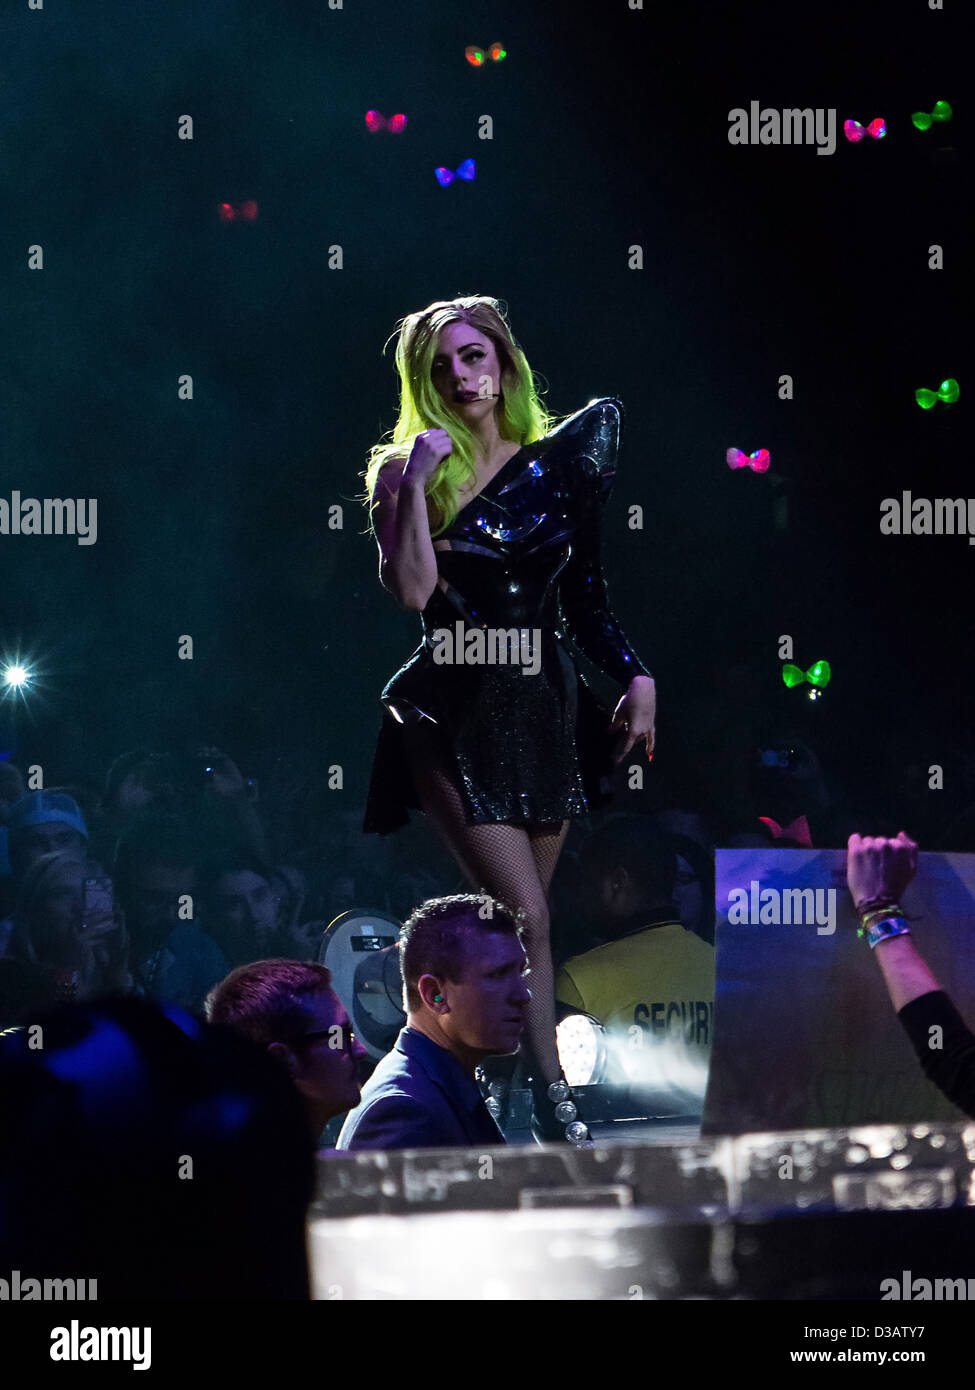 American singer Lady Gaga performs during her Born This Way Ball tour in Toronto, Ontario, Canada on Friday February 9, 2013. Stock Photo